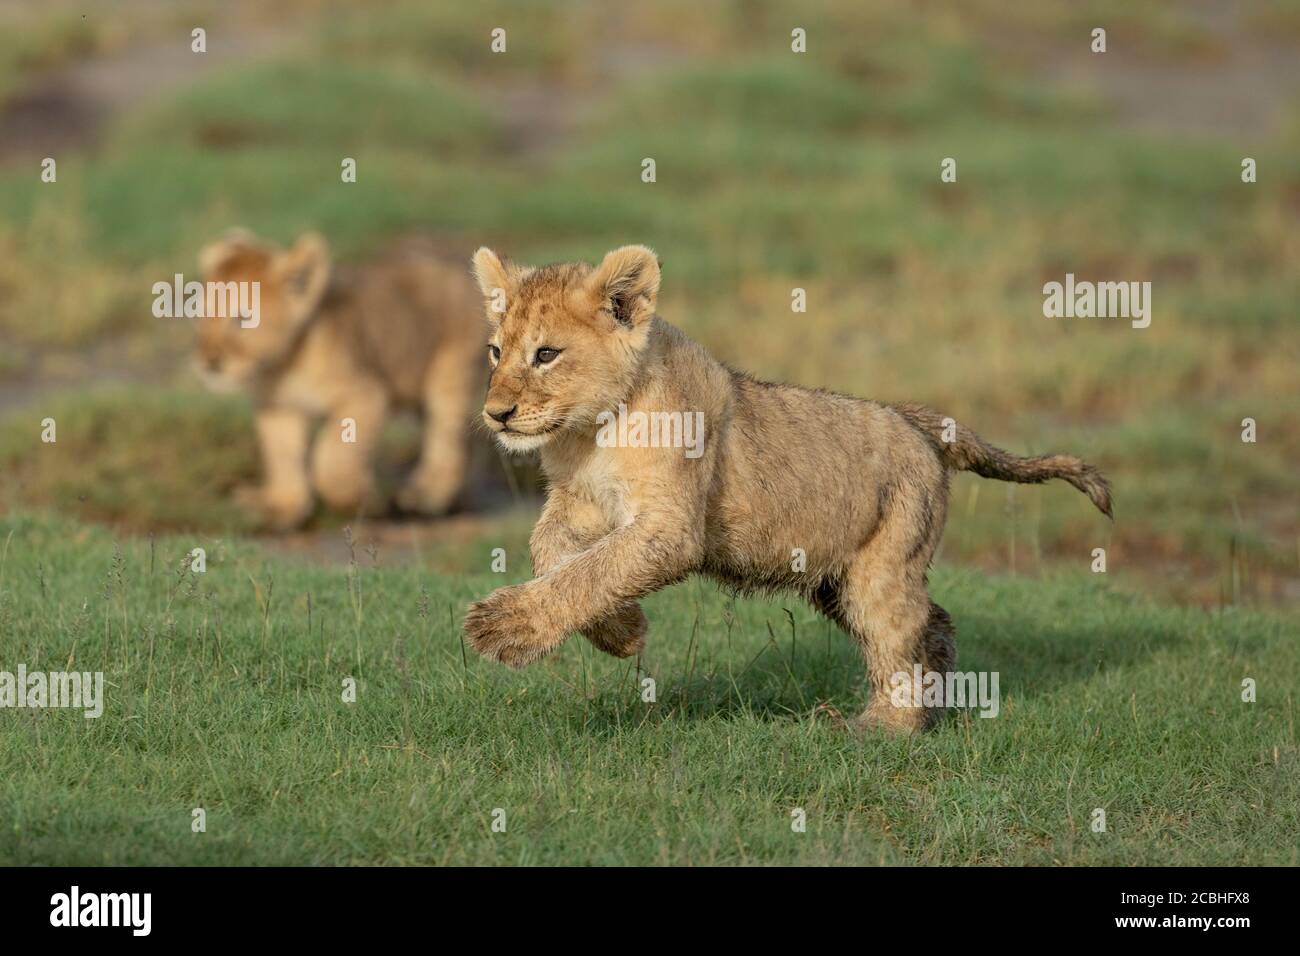 Cute lion cub running across green grass with sibling in background in warm afternoon light in Ndutu Tanzania Stock Photo